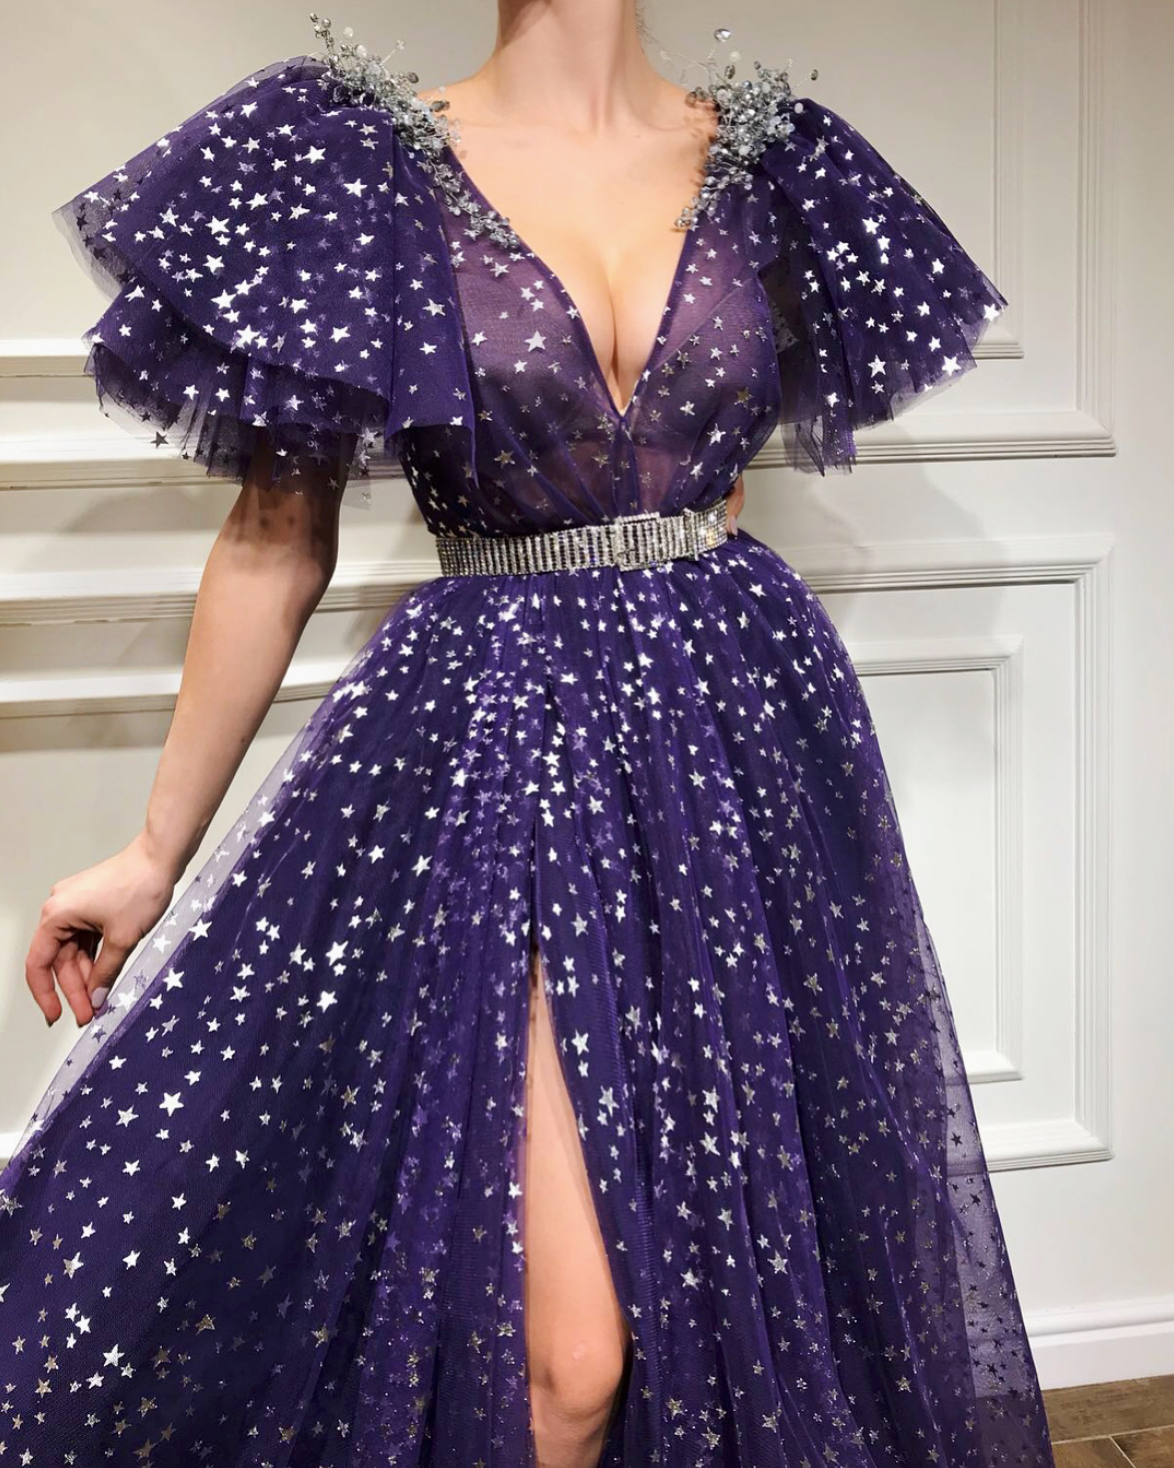 Purple A-Line dress with belt, v-neck, starry fabric, embroidery and short sleeves